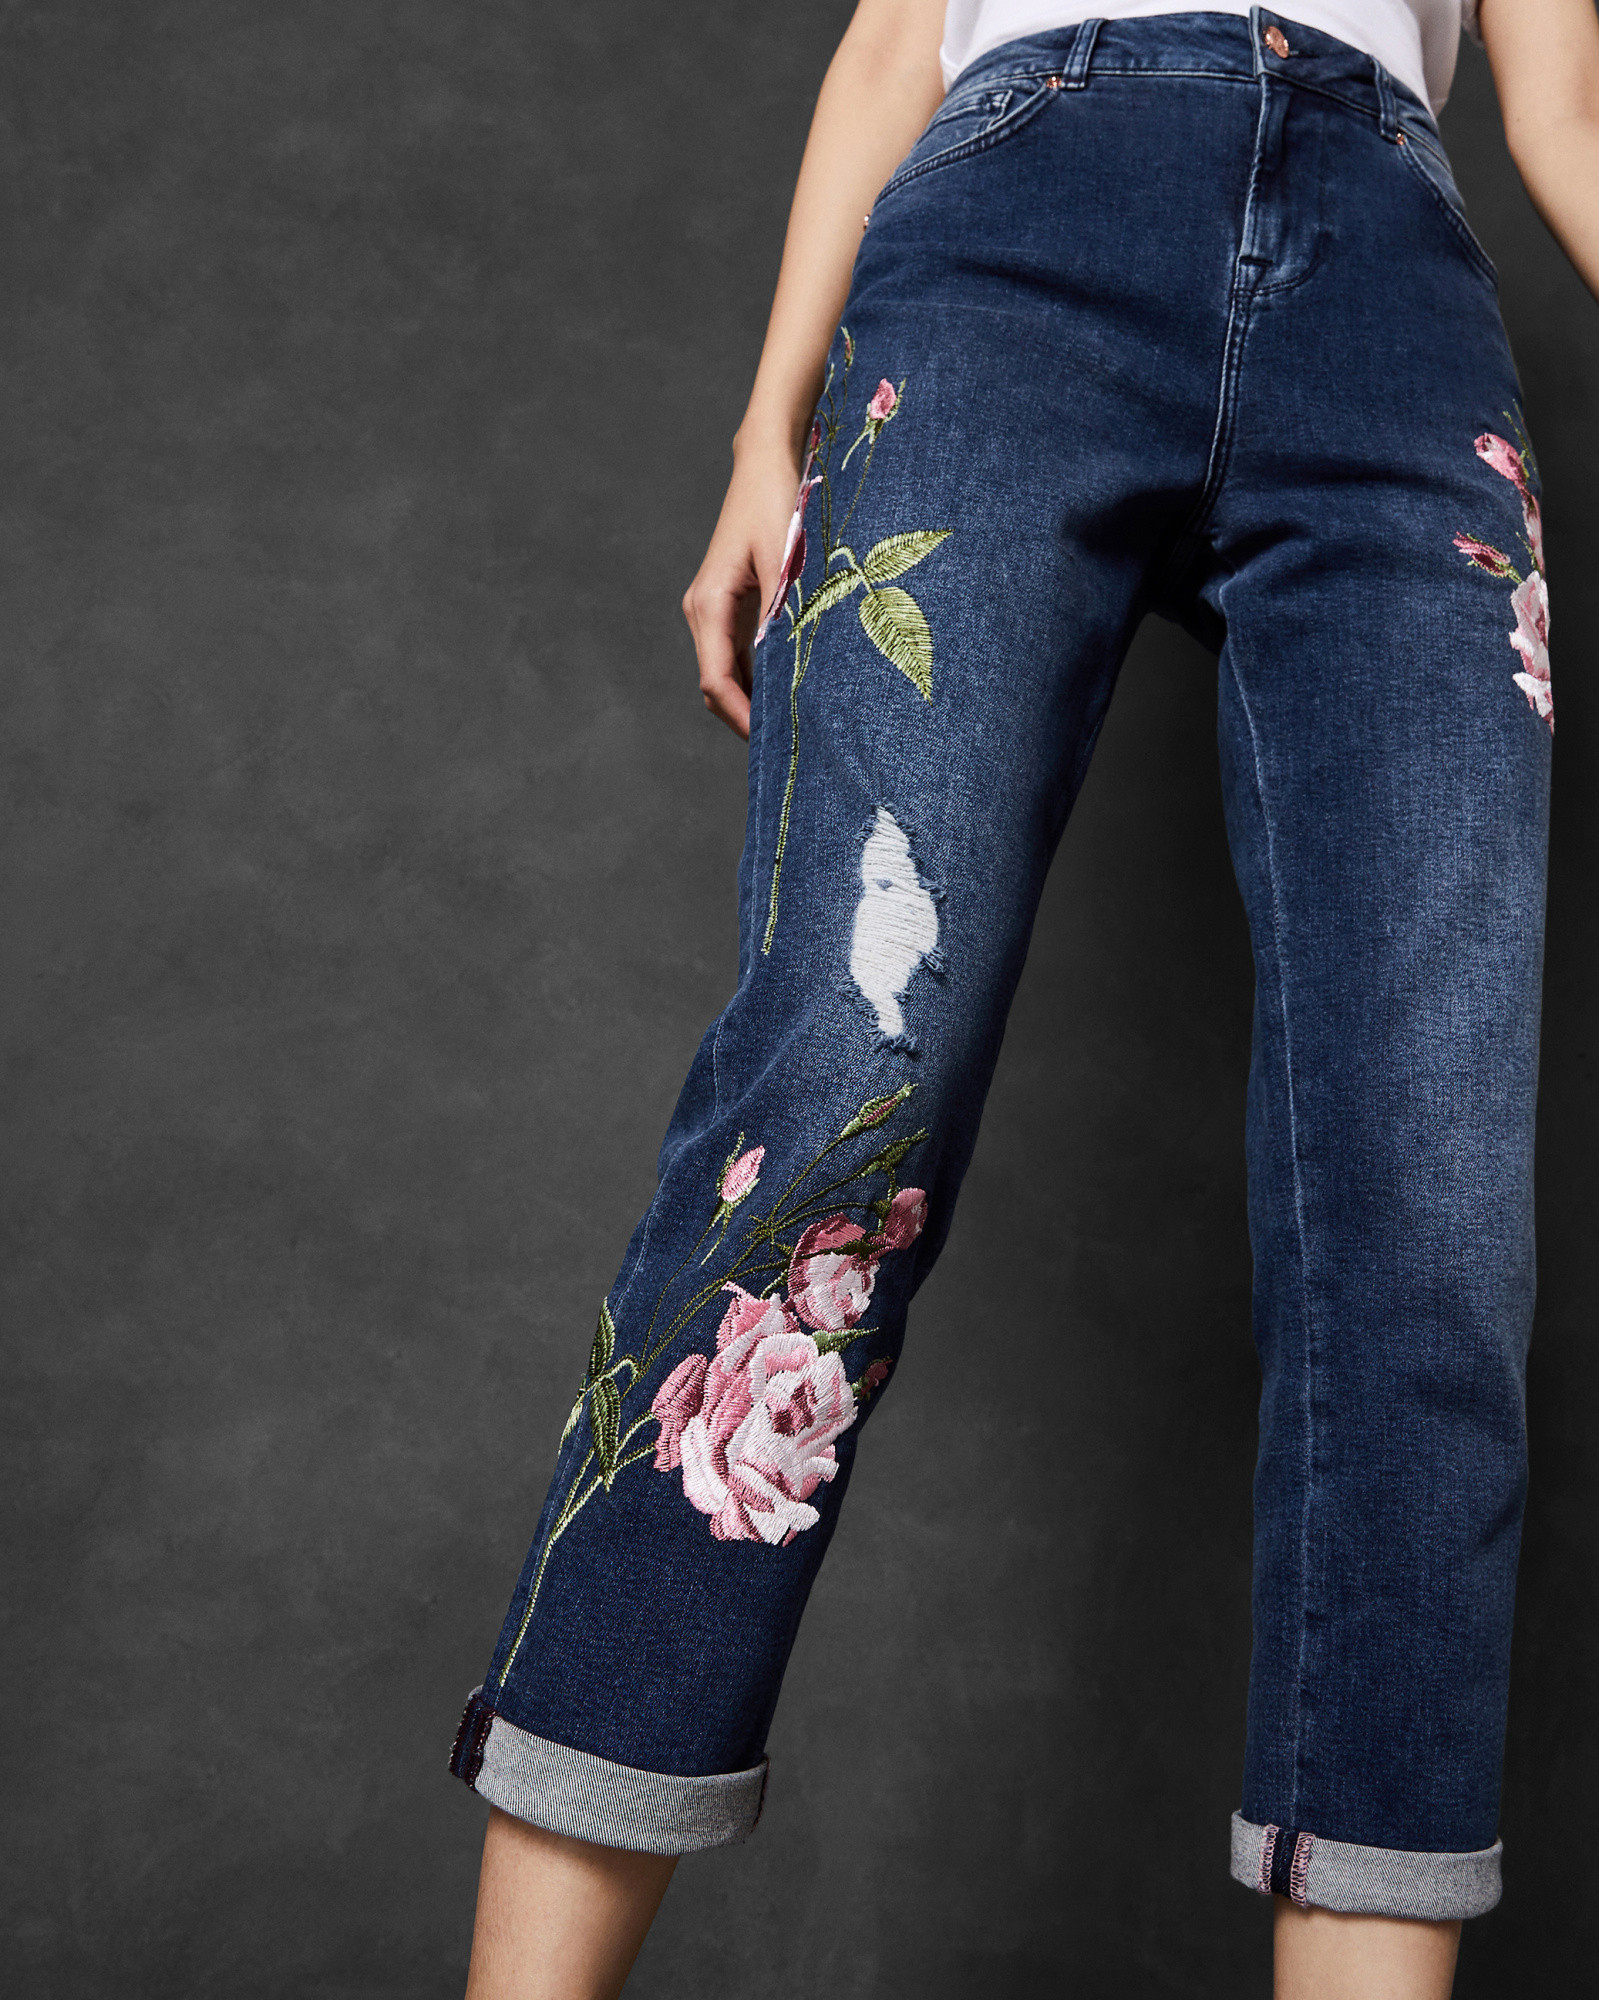 KHLOWE Floral embroidered boyfriend jeans